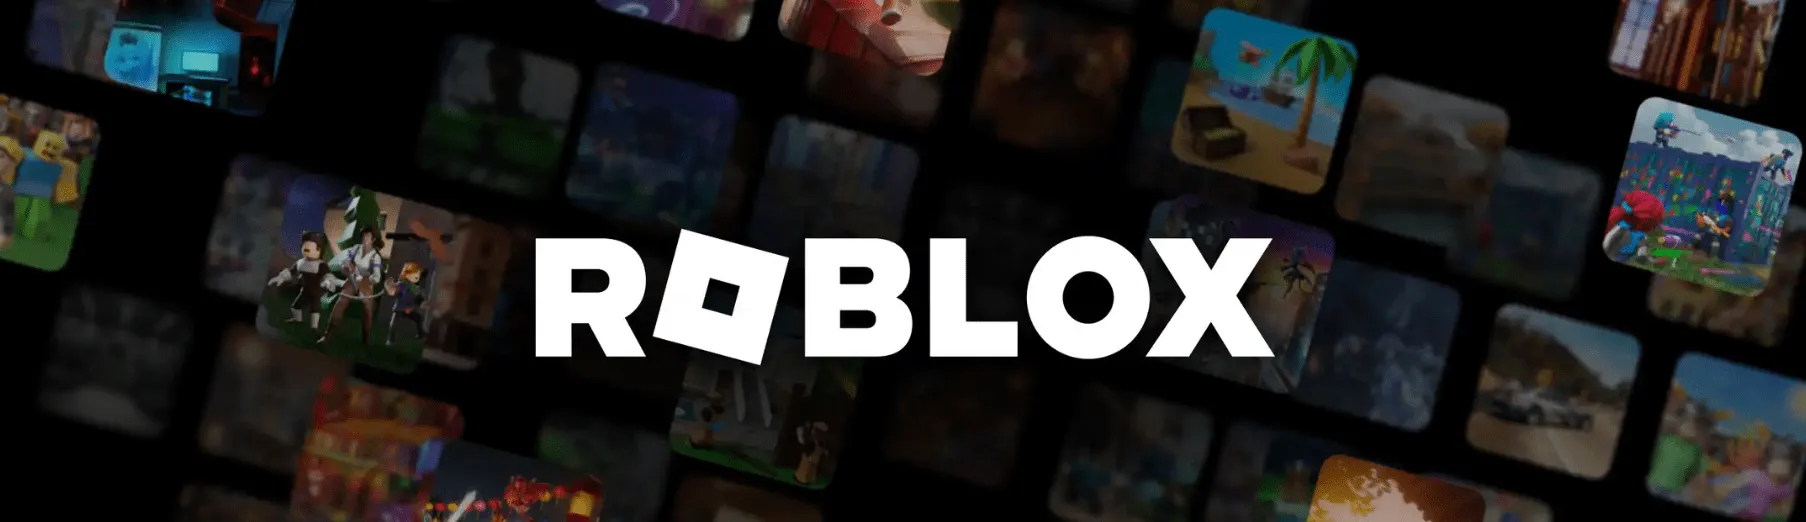 Roblox-website-cover